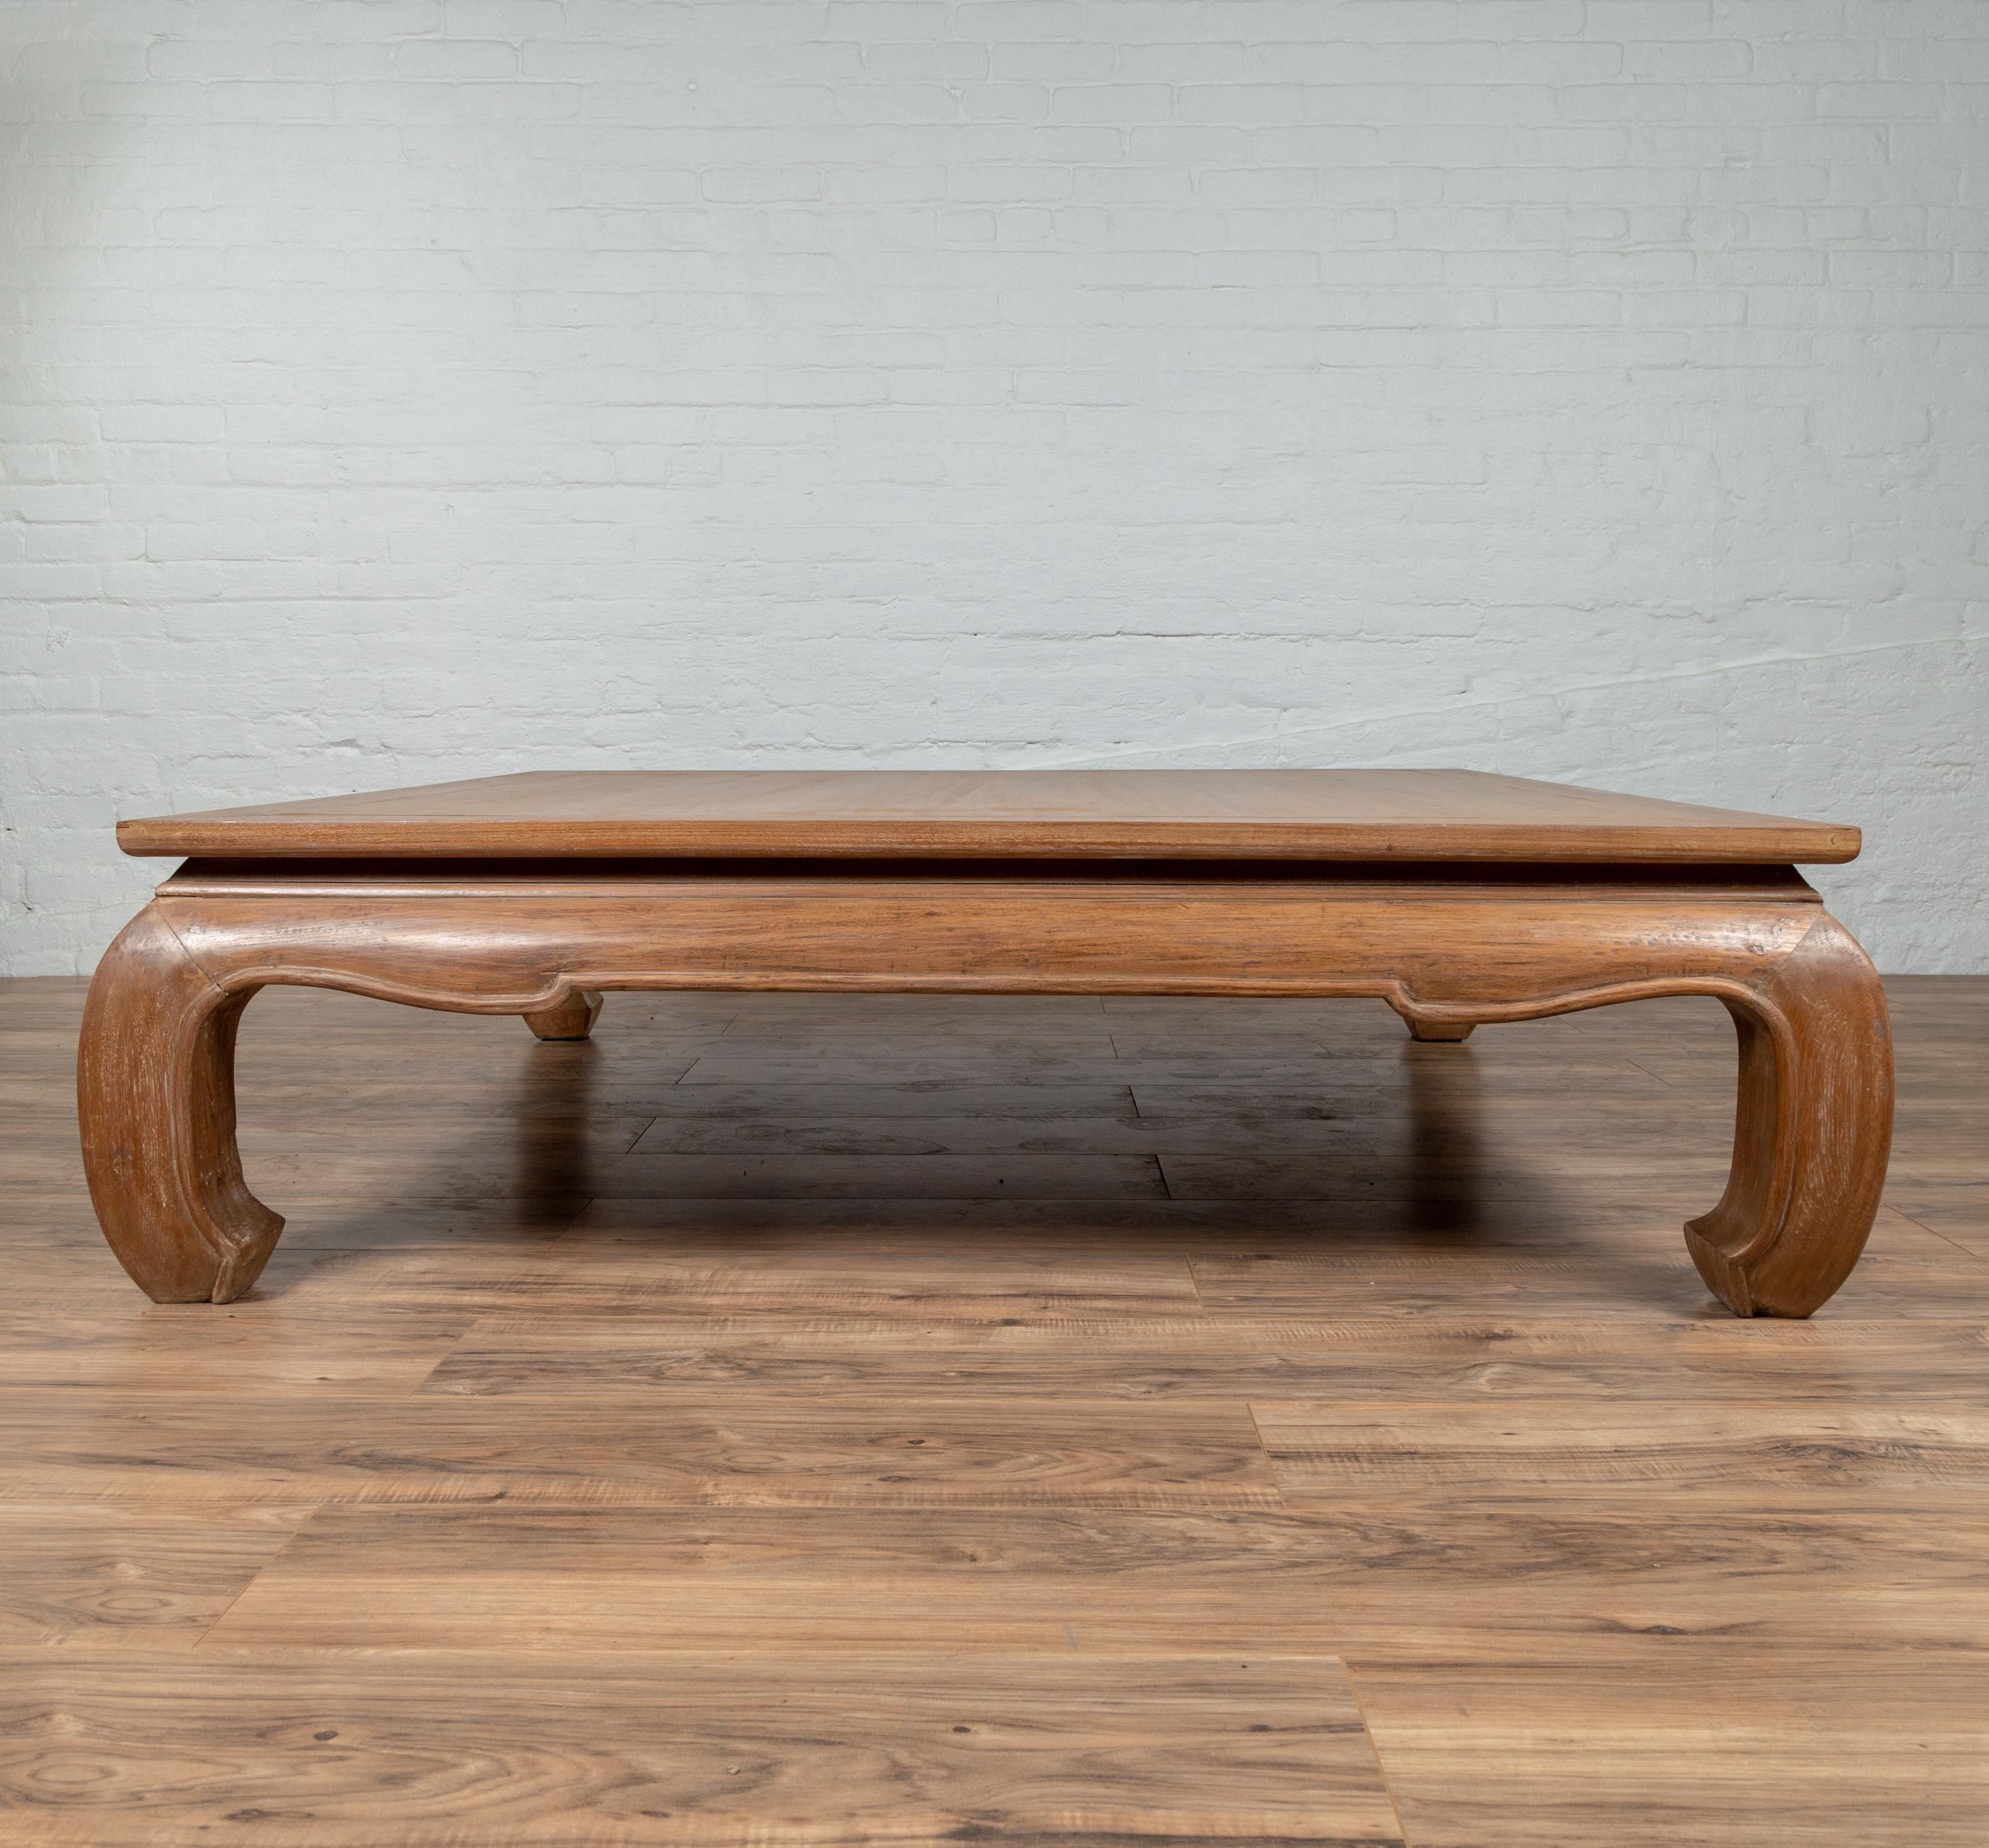 An antique Chinese coffee table from the early 20th century, with natural patina and bulging legs ending in horse-hoof feet. Born in China in the early years of the 20th century, this simple yet elegant coffee table features a square top with